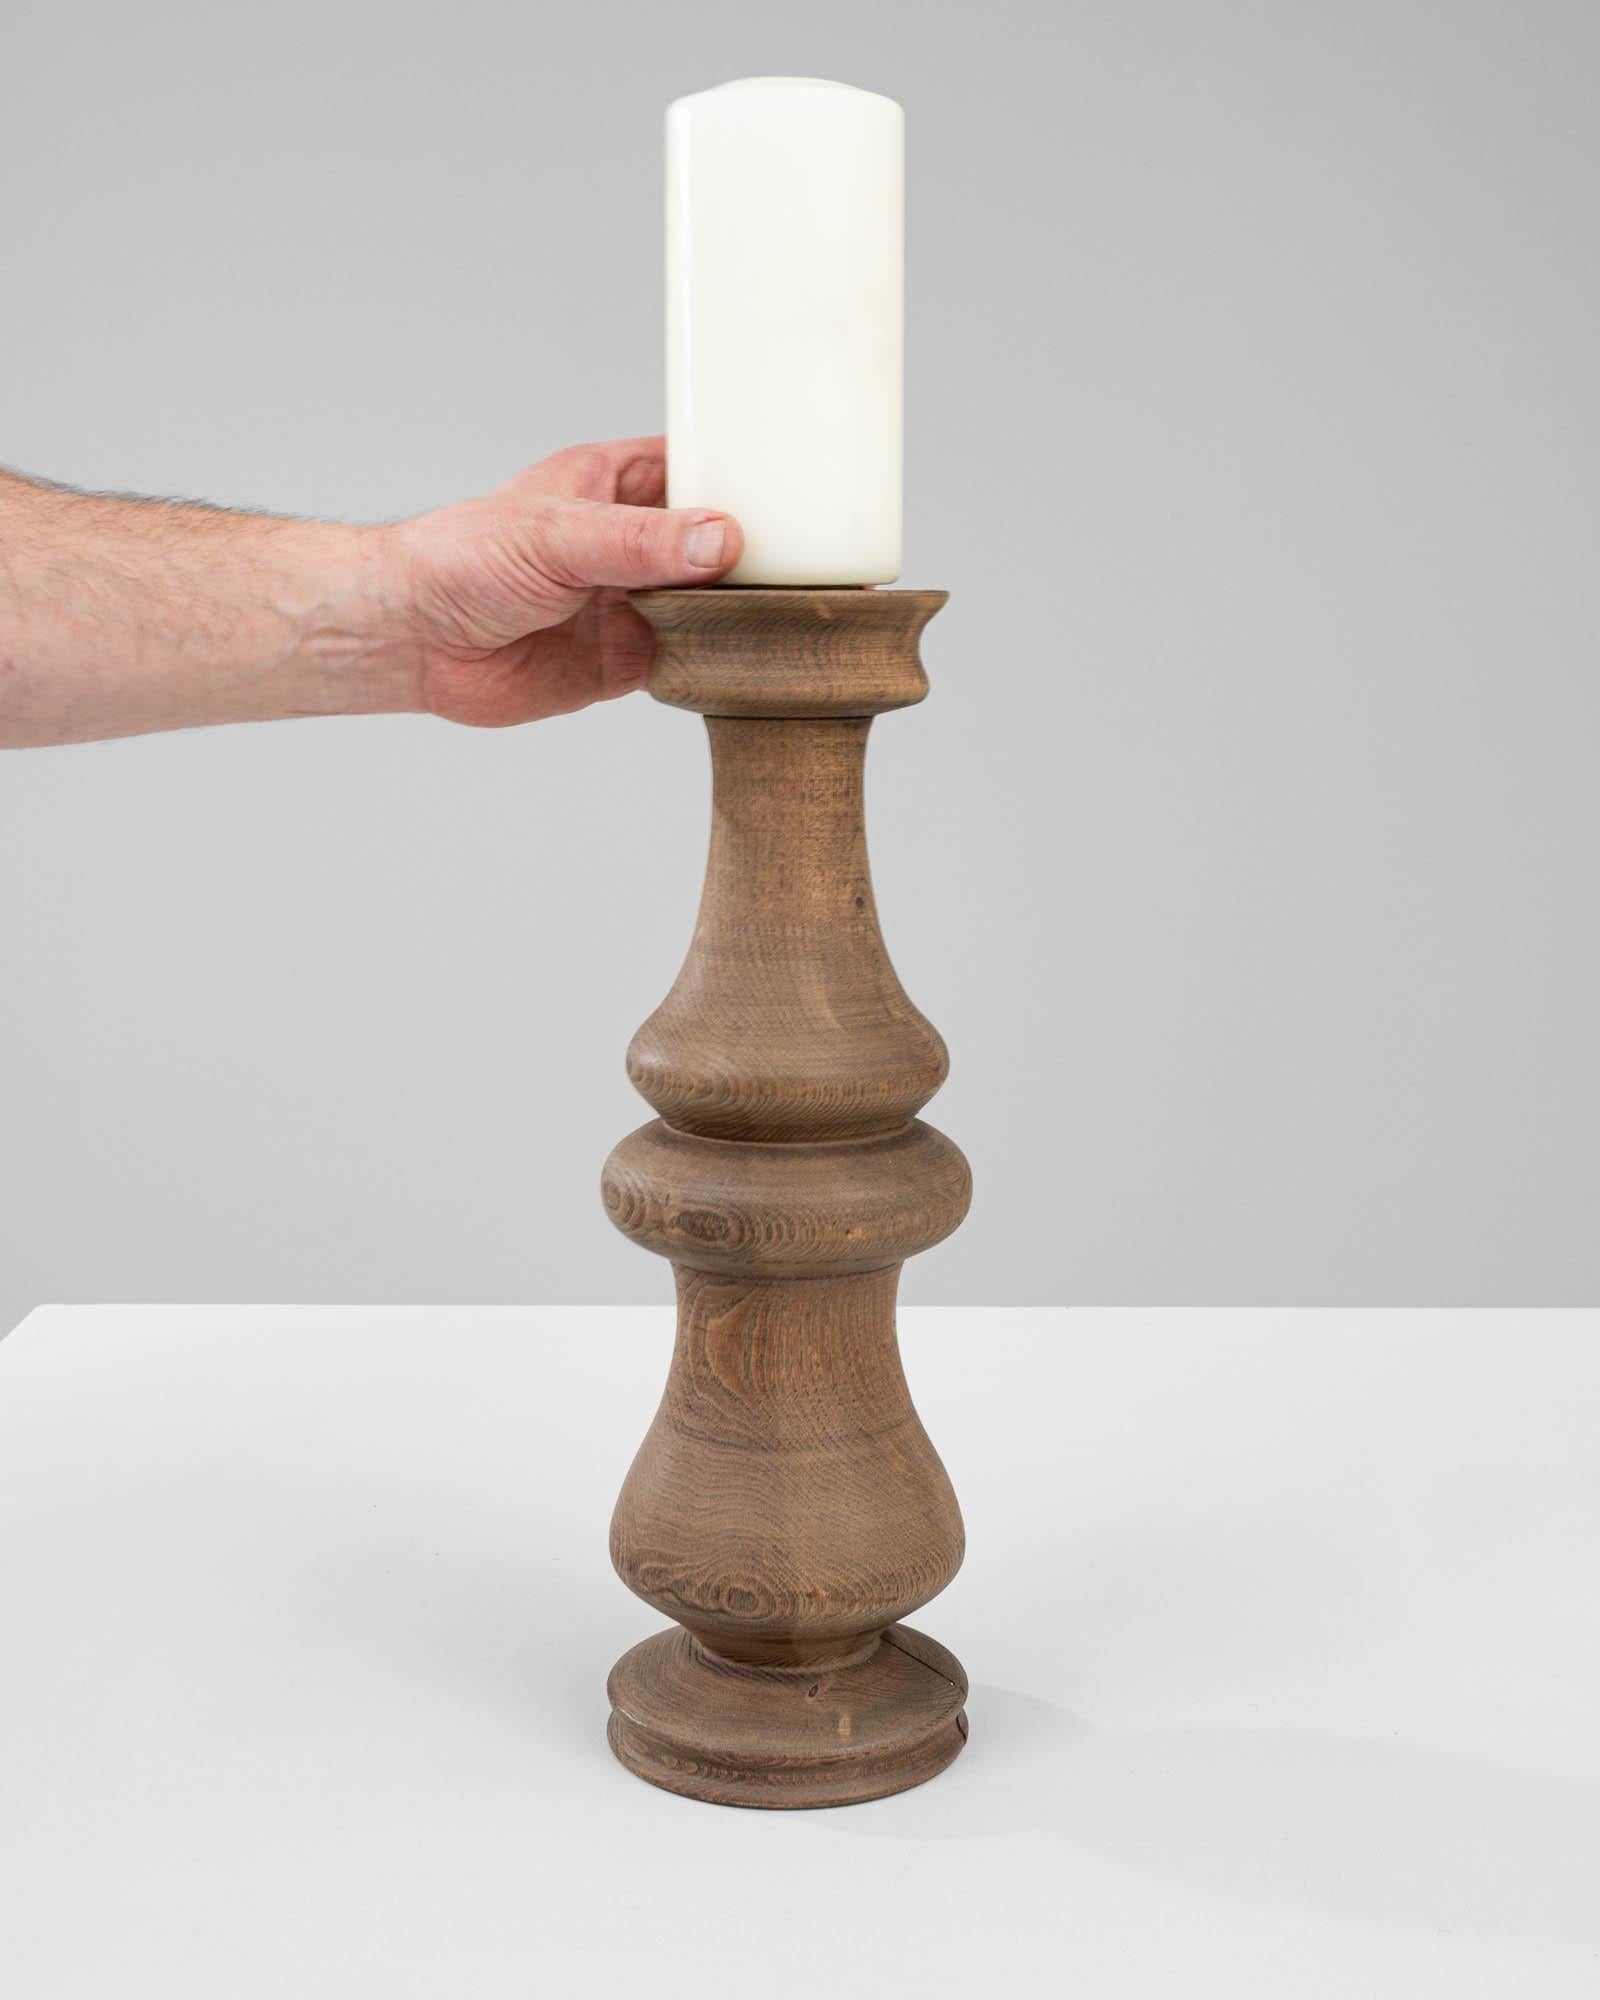 This 1900s French Wooden Candlestick is a beautifully turned piece of craftsmanship that brings with it the timeless appeal of natural wood. Each contoured segment, masterfully shaped, reveals the distinct rings and grain of the wood, bearing